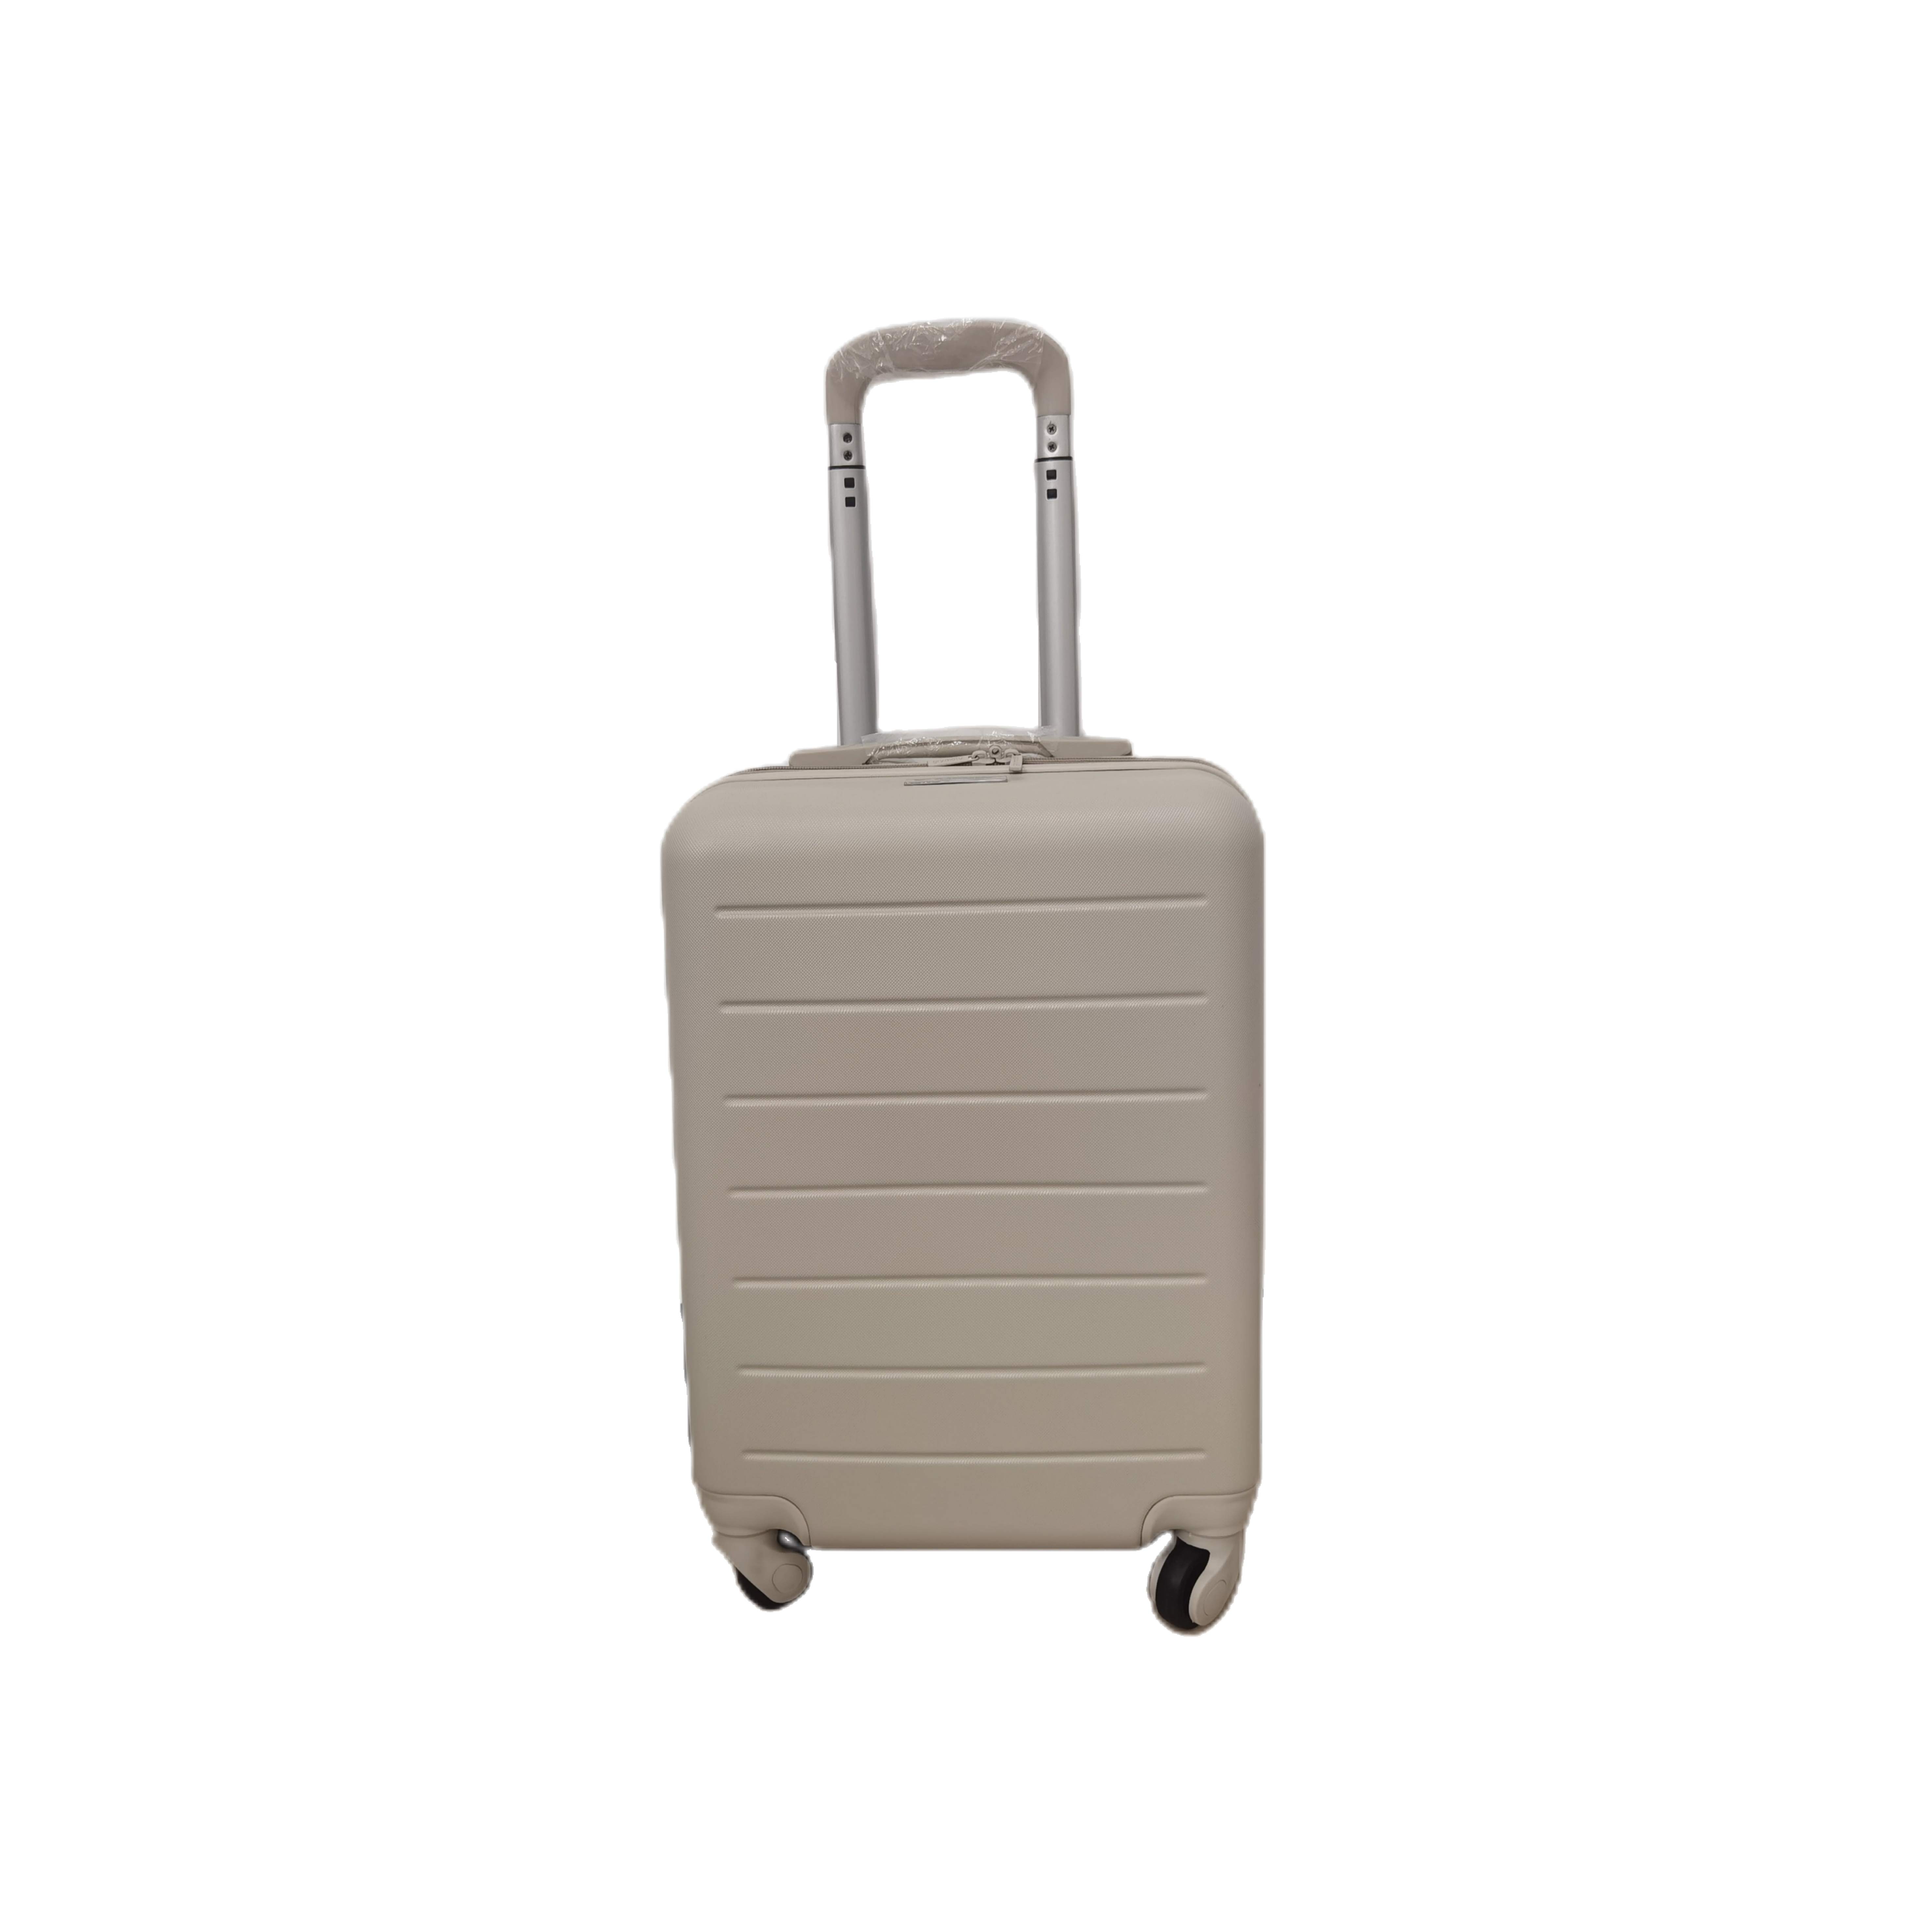 18 inch Carry on Trolley Luggage for Woman and Children